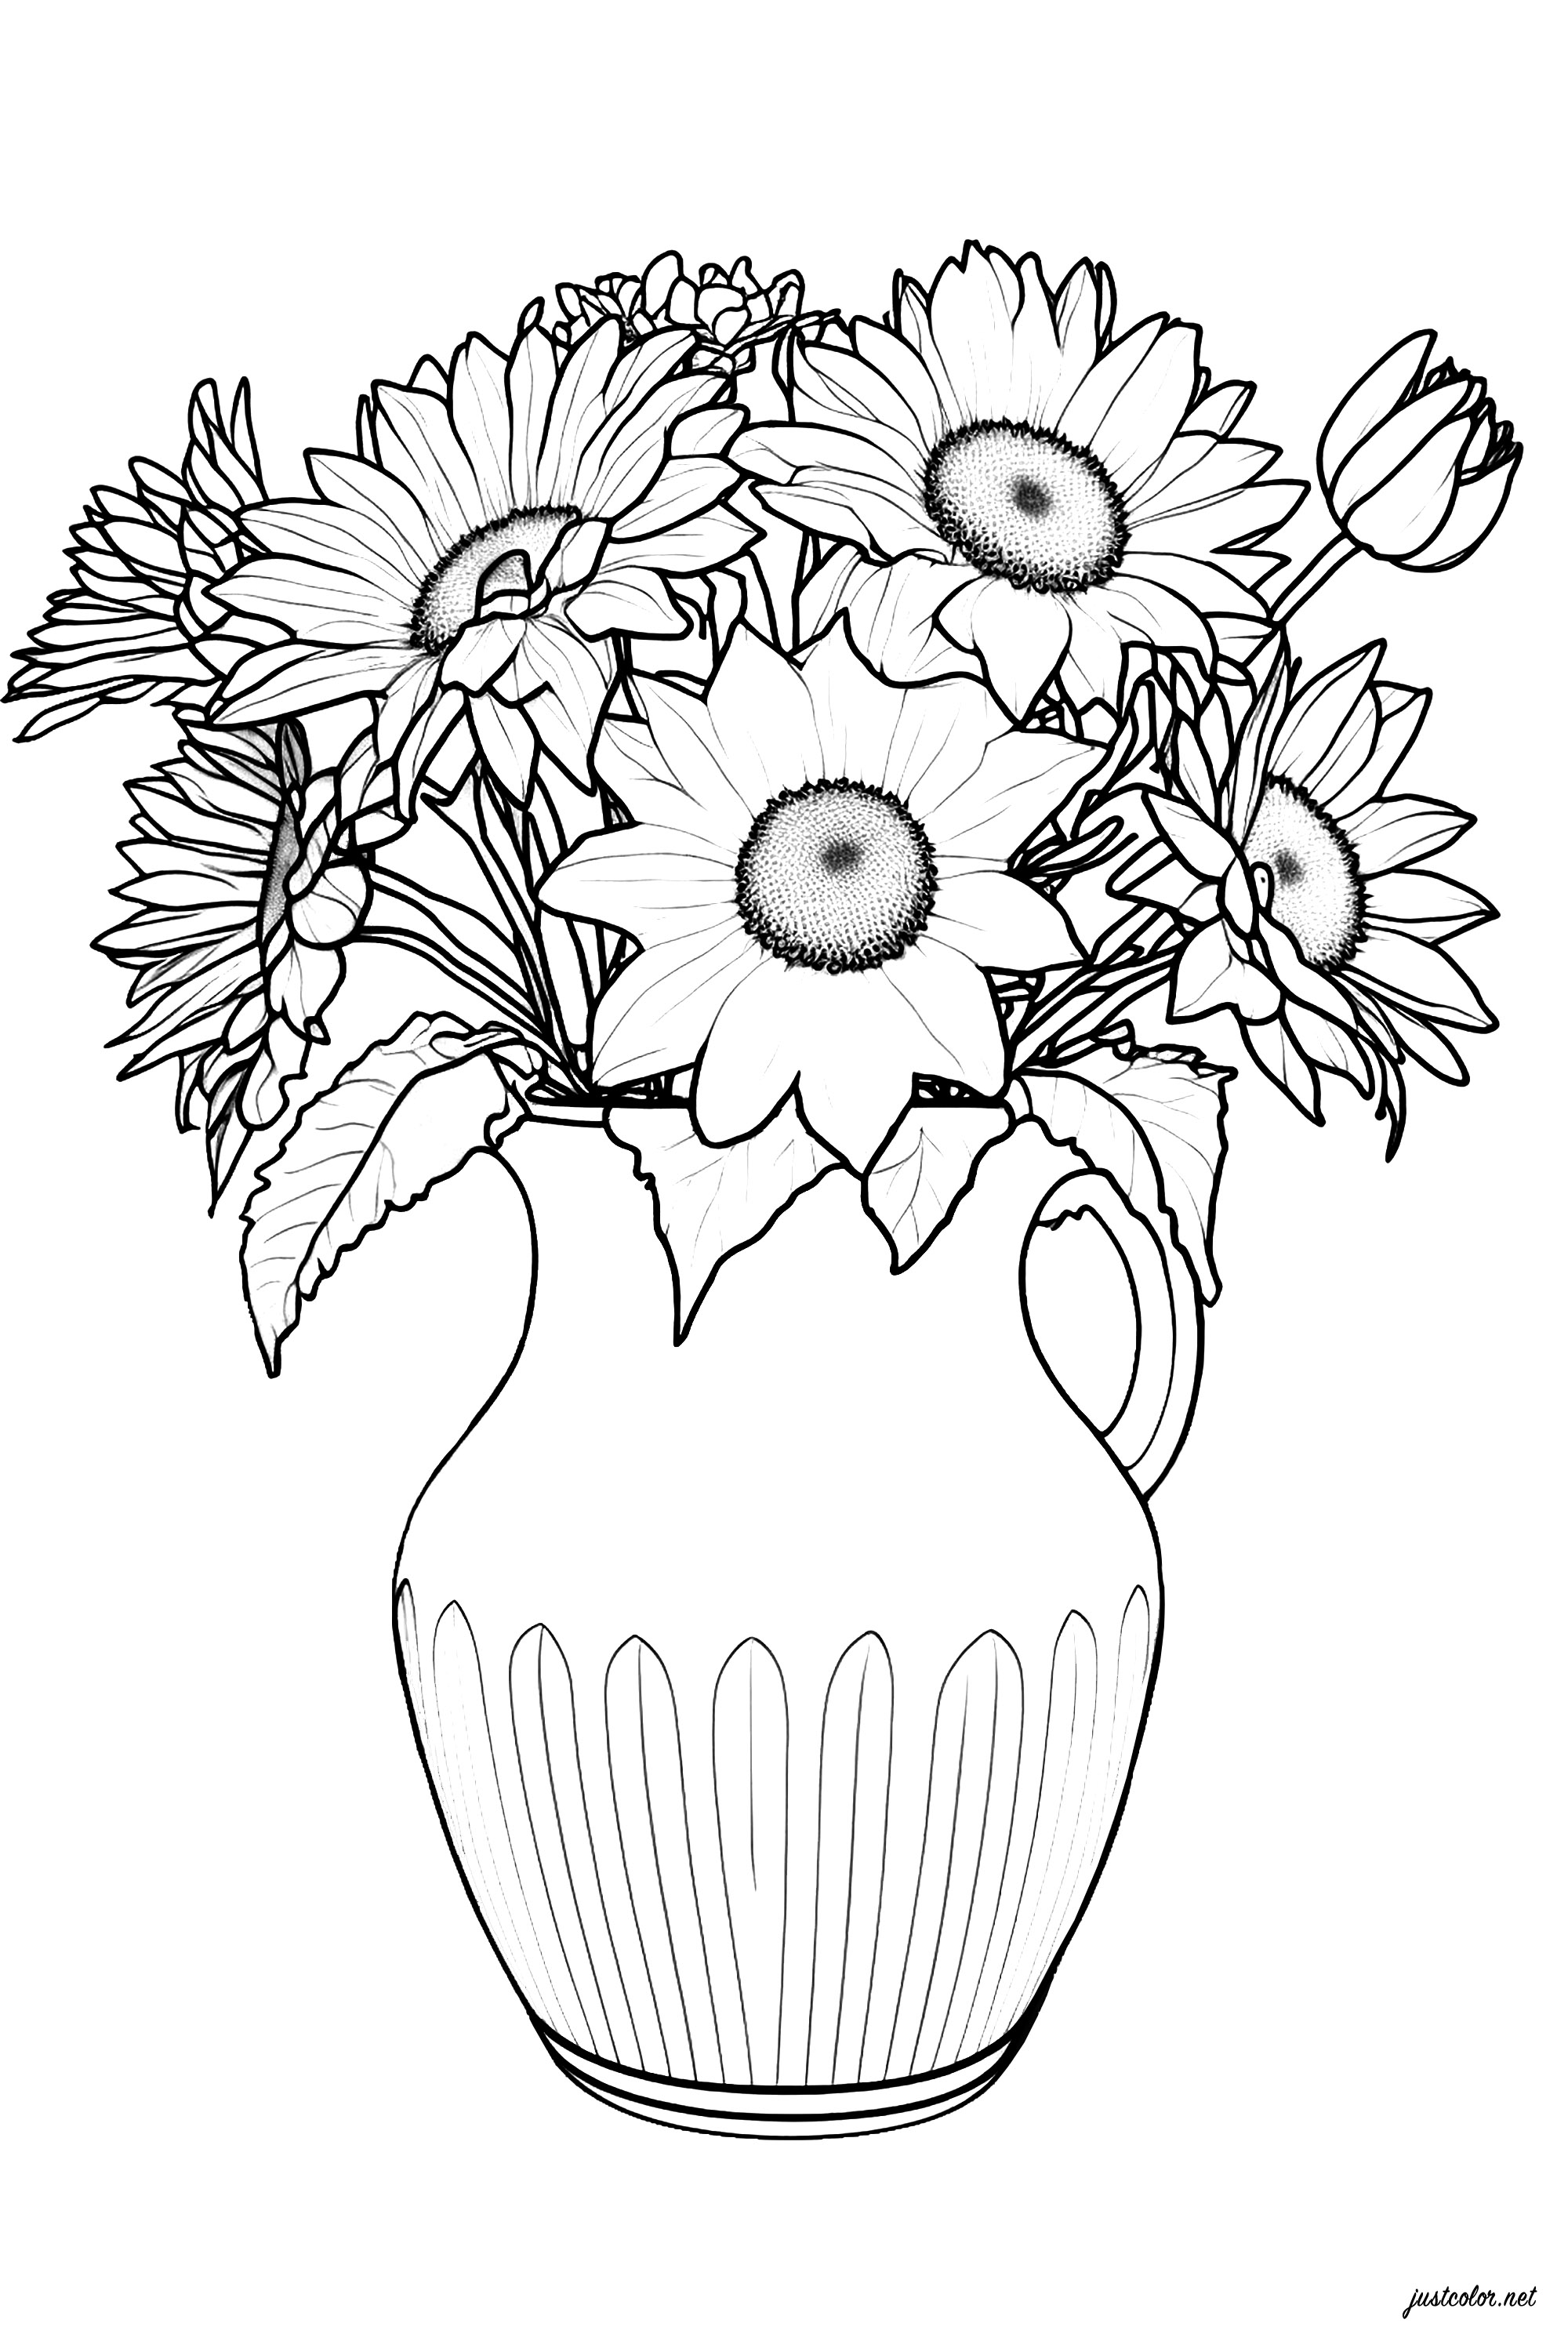 Beautiful flowers in a vase. An absolutely beautiful coloring representing a vase of classic shape, filled with flowers... to color in bright and varied colors.